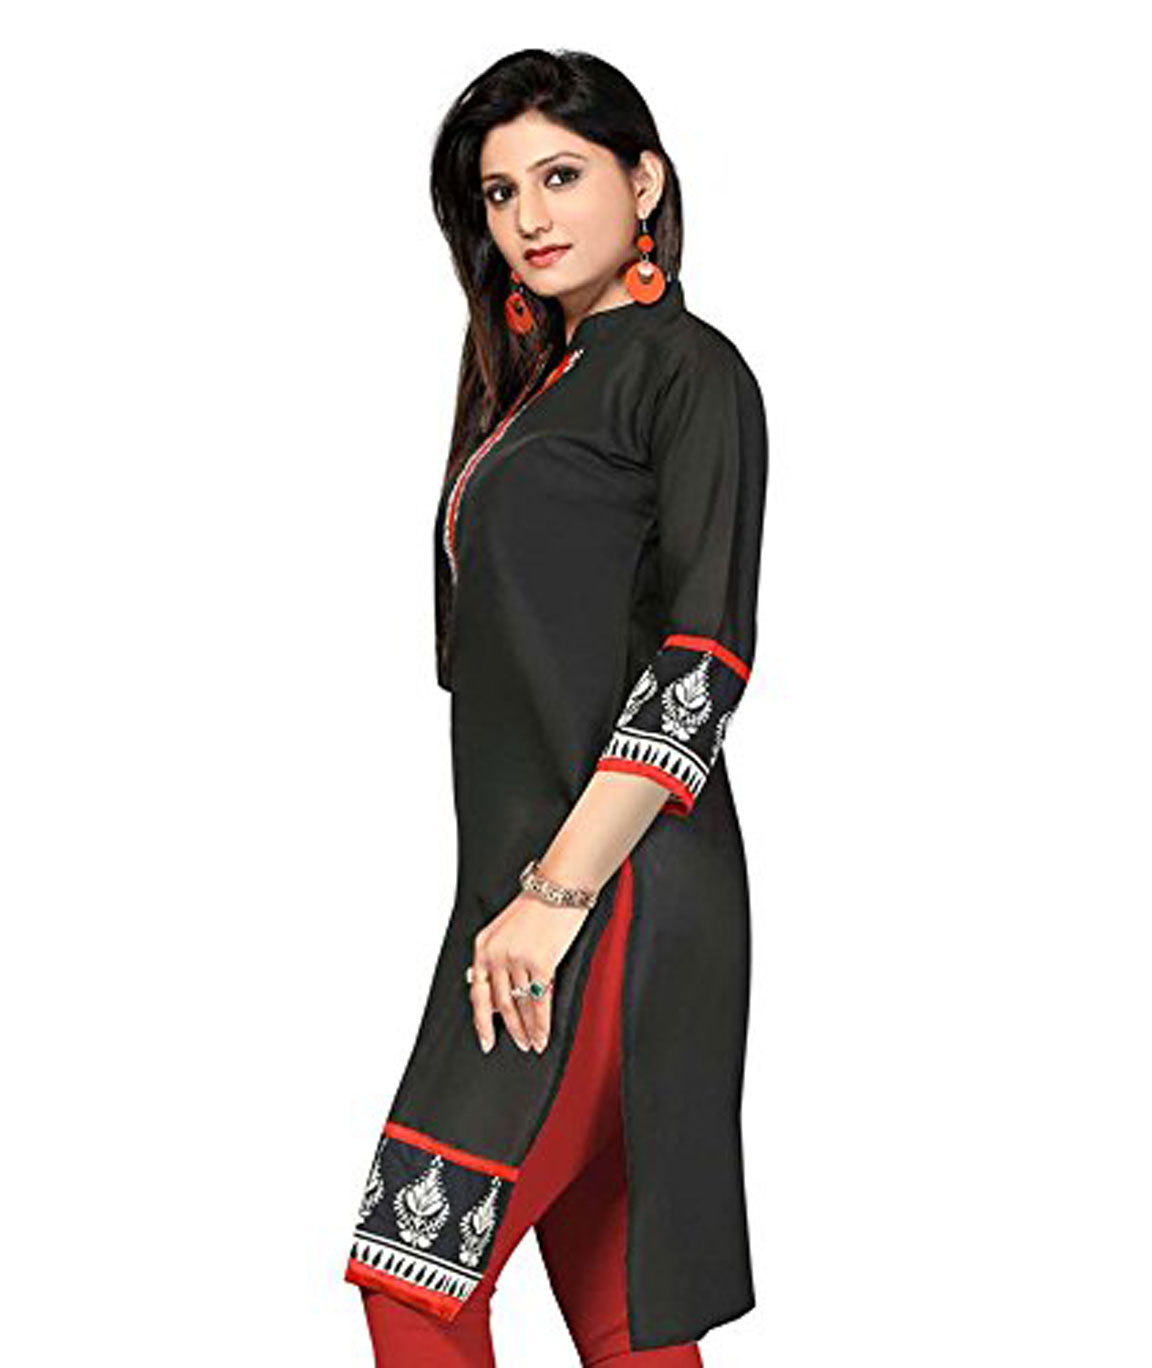 Buy Fancy Kurti with White Leggings (Set of 4) Size-38 Colors-Green, Sky  Blue, Yellow, Black at Amazon.in